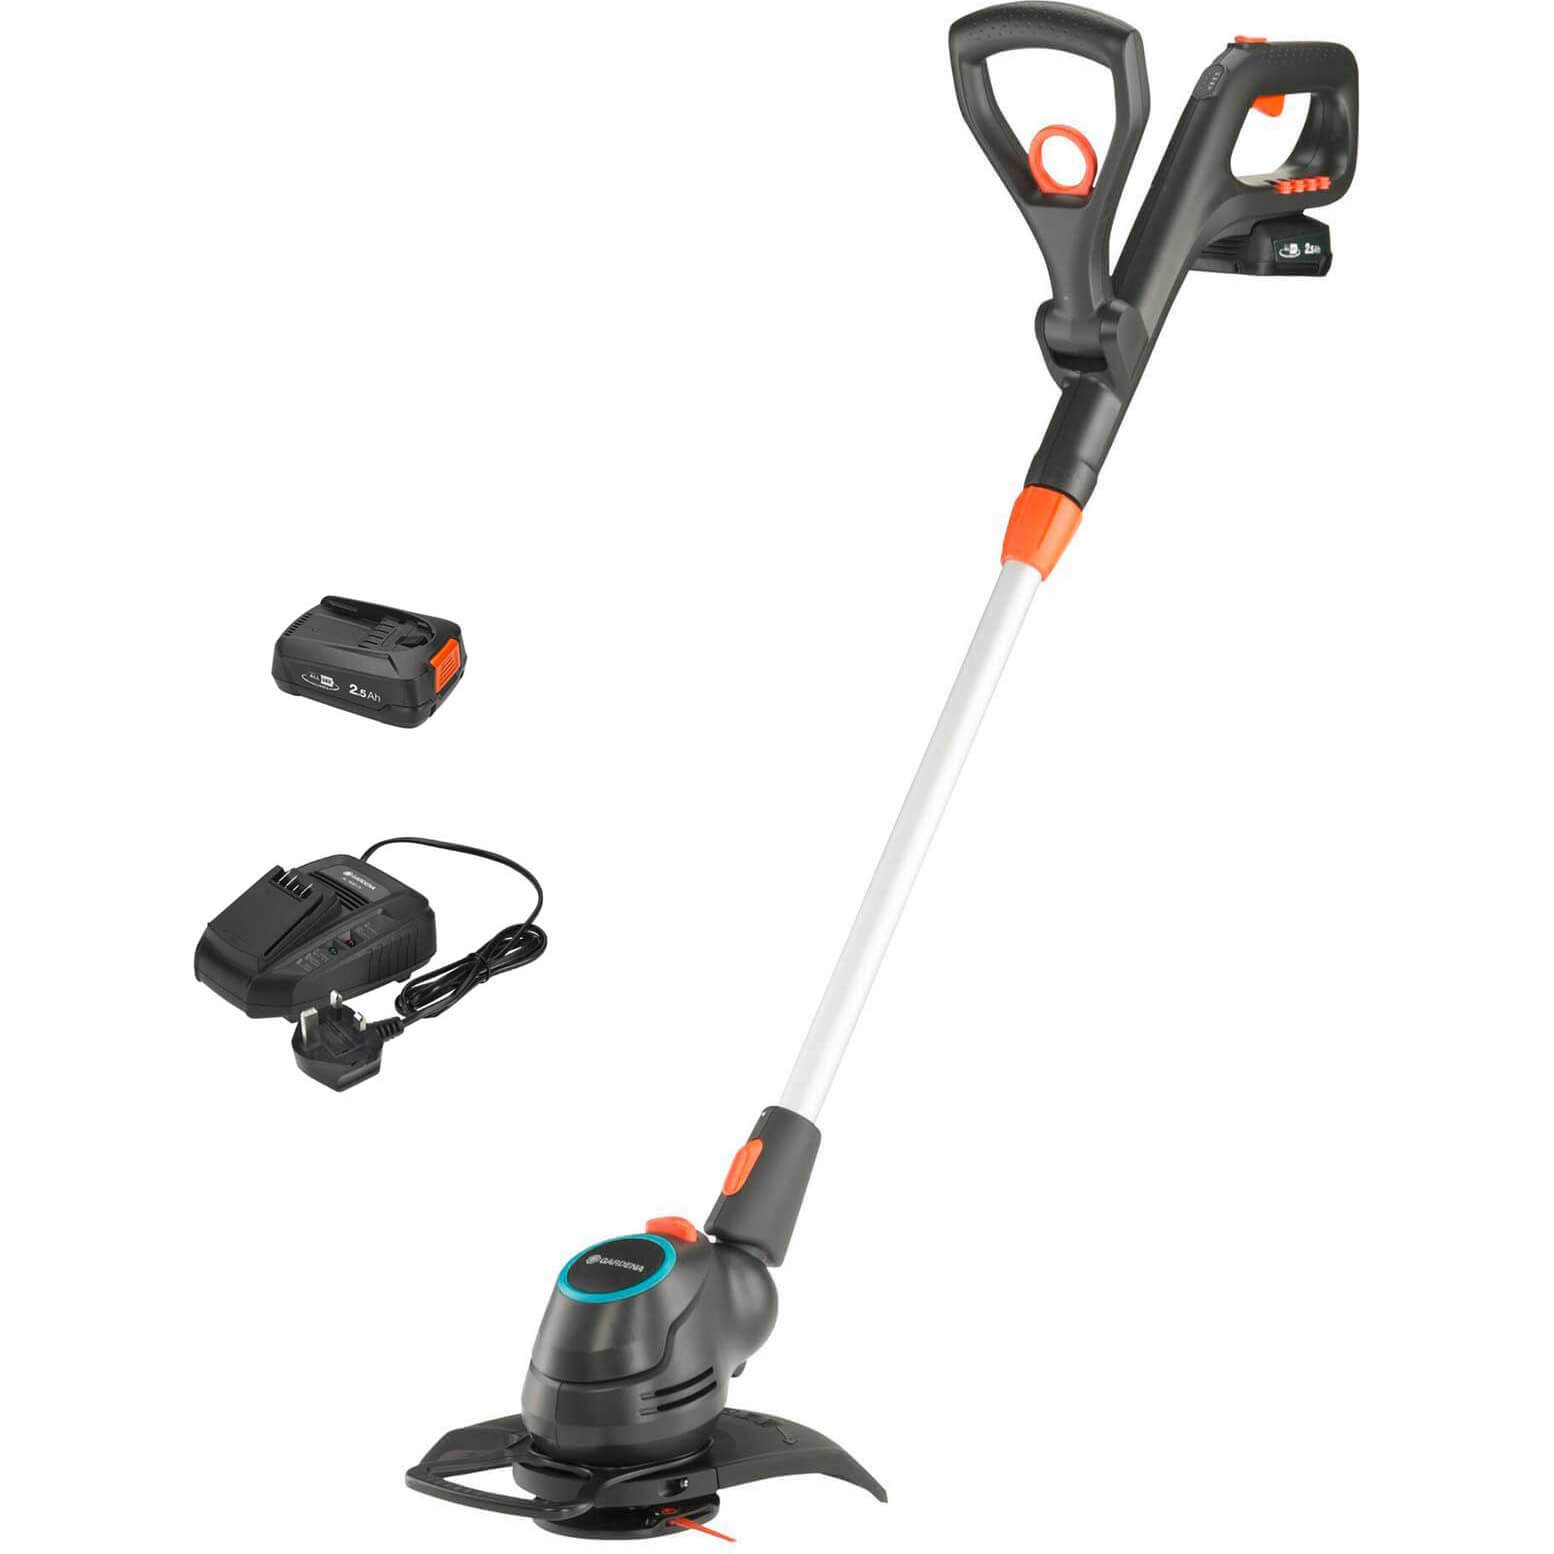 Image of Gardena COMFORTCUT 23 P4A 18v Cordless Grass Trimmer and Edger 230mm 1 x 2.5ah Li-ion Charger